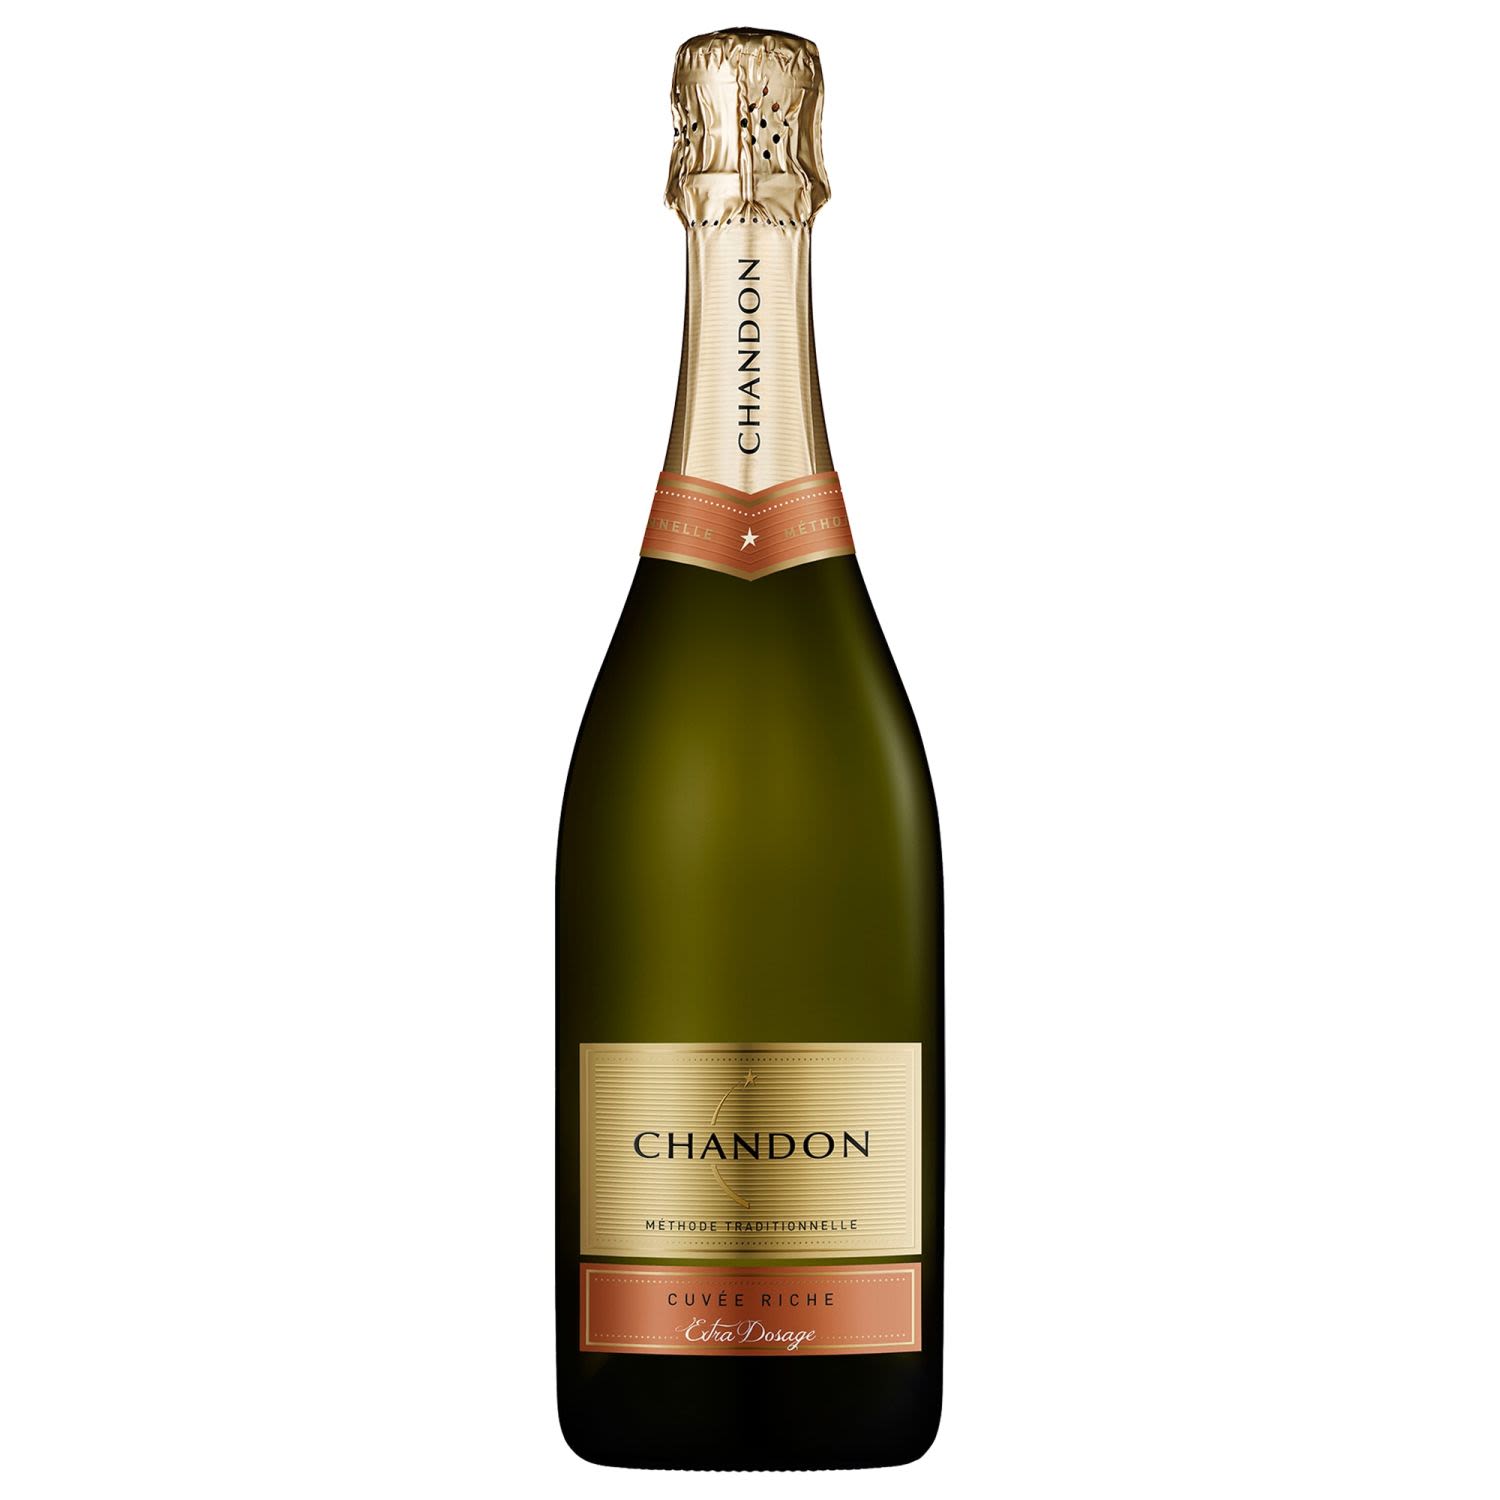 The Chandon Australia Cuvee Riche has been uniquely modelled on the French champagne style ‘doux’. This style creates a sweeter, richer and more luscious sparkling wine. Cuvee Riche is generous, opulent and enticing with a refreshingly crisp finish.<br /> <br />Alcohol Volume: 12.50%<br /><br />Pack Format: Bottle<br /><br />Standard Drinks: 7.7</br /><br />Pack Type: Bottle<br /><br />Country of Origin: Australia<br /><br />Region: Yarra Valley<br /><br />Vintage: Non Vintage<br />